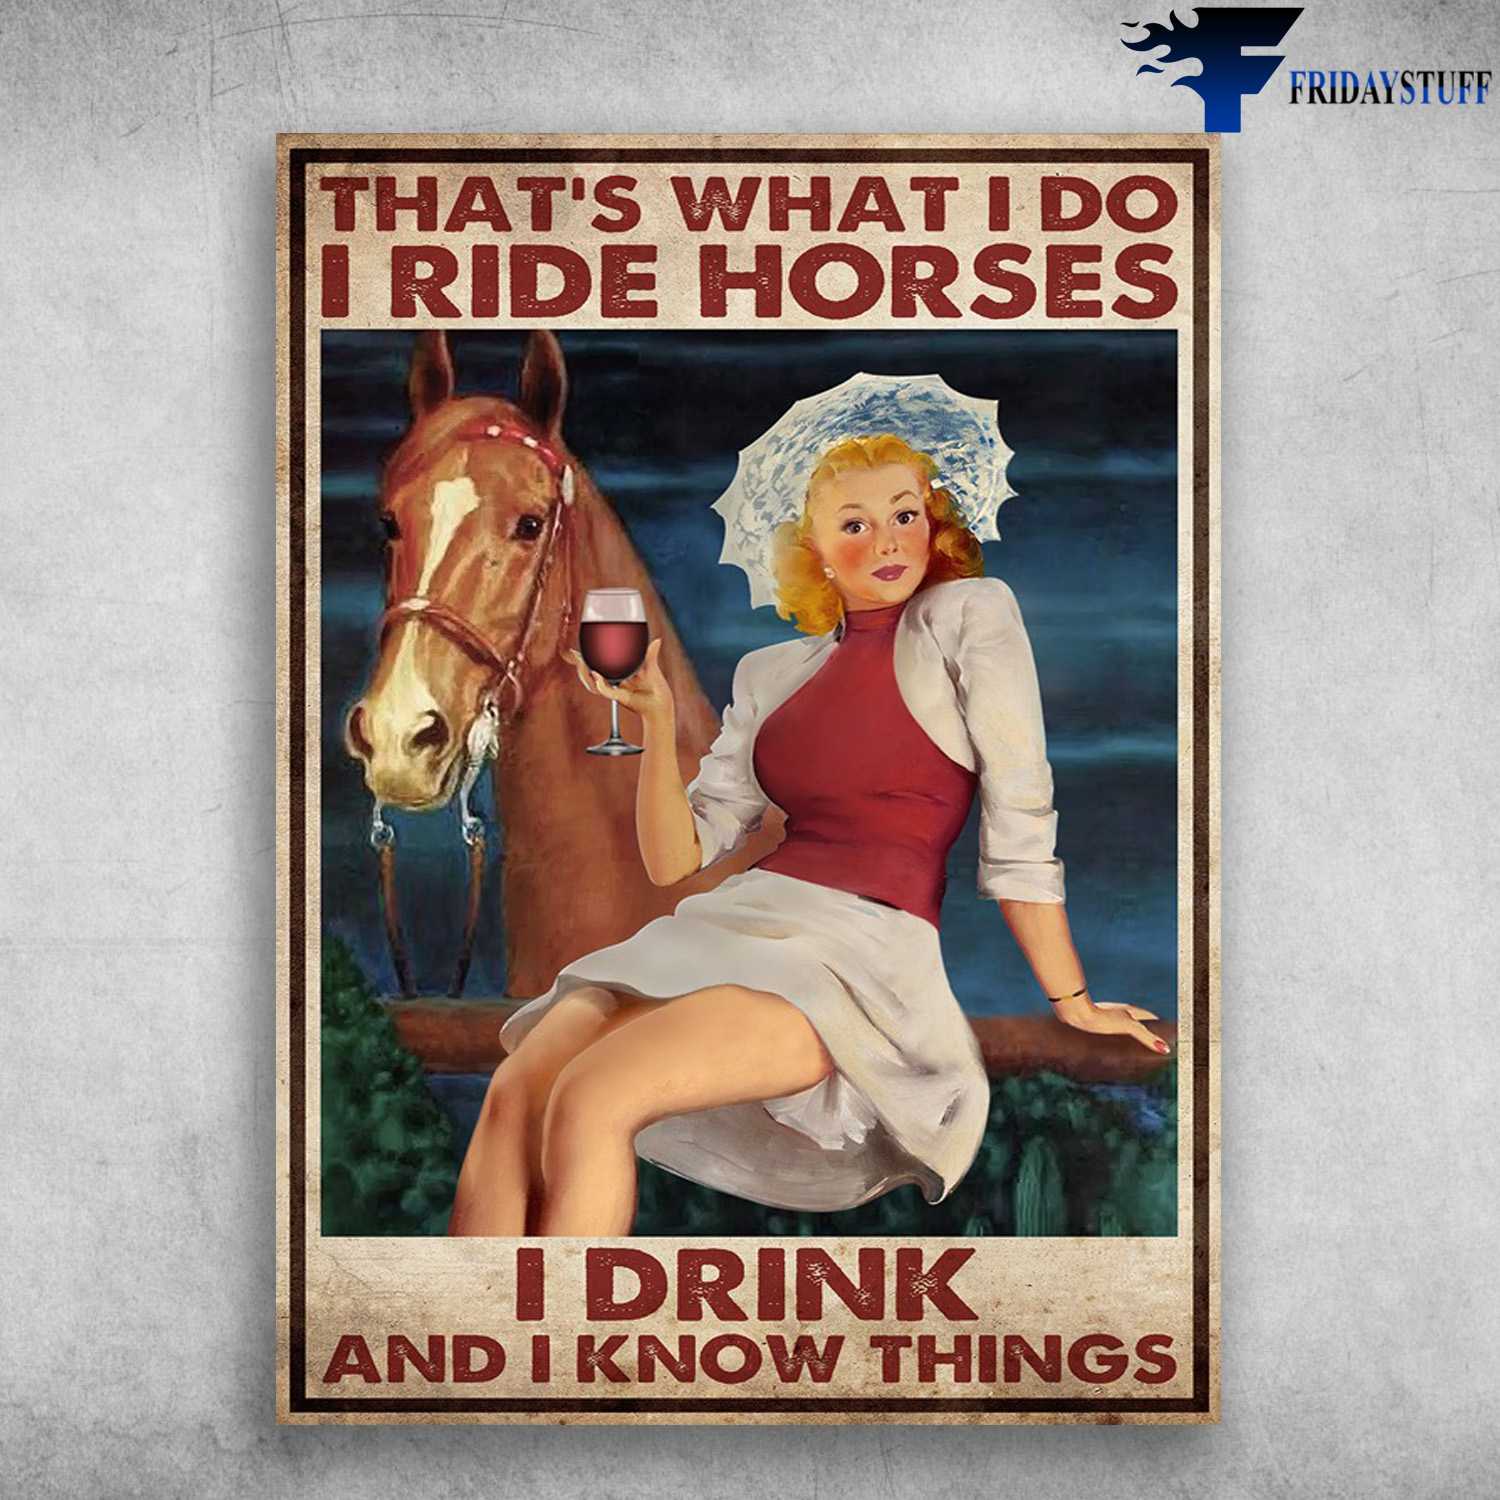 Lady Drinks Wine, Horse And Wine - That's What I Do, I Ride Horses, I Drink, And I Know Things